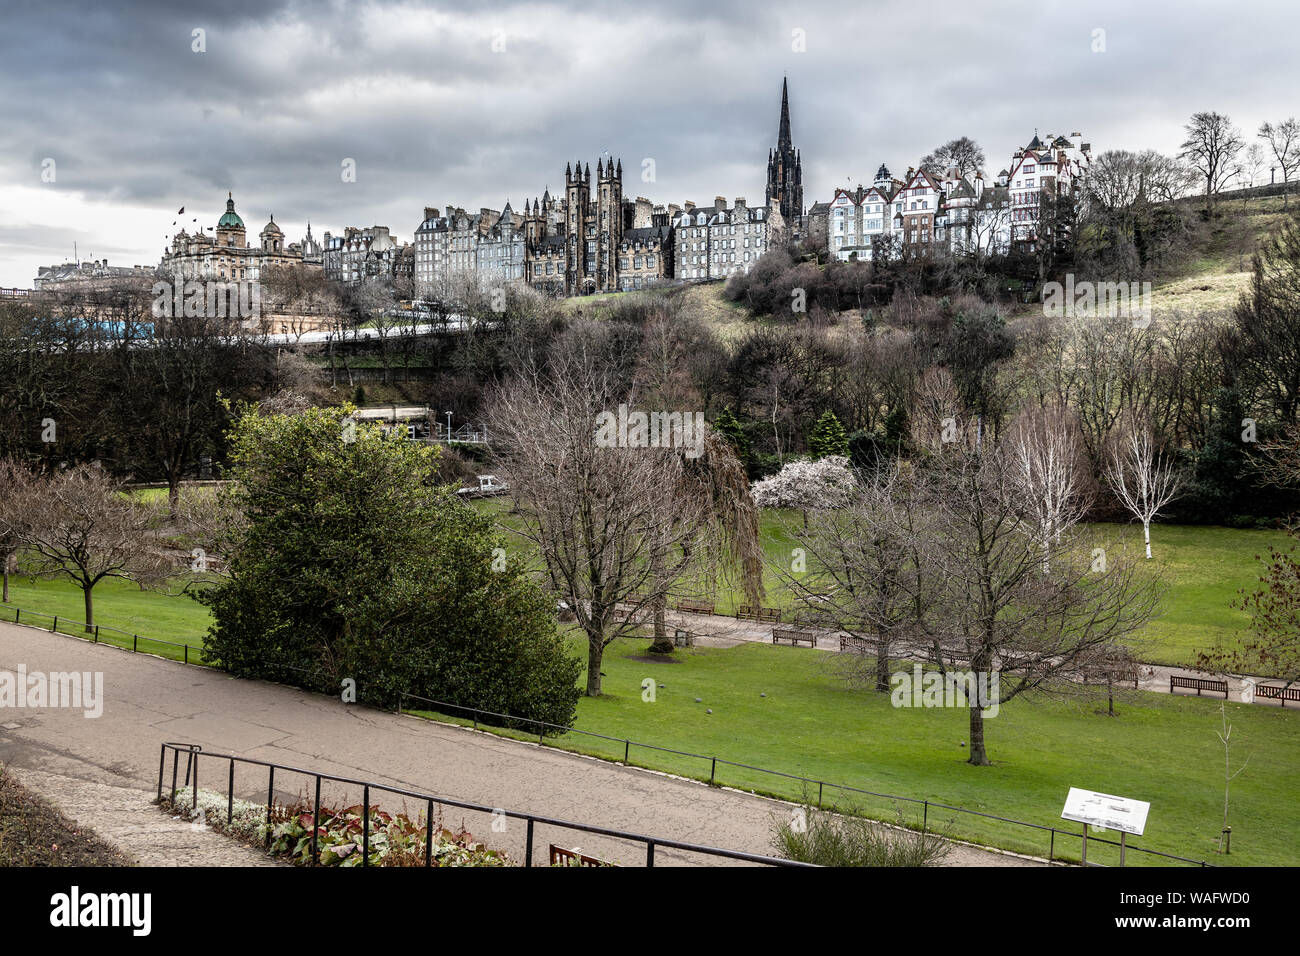 Iconic view of Old houses and buildings of Edinburgh Old Town with Princes Gardens in the foreground Stock Photo